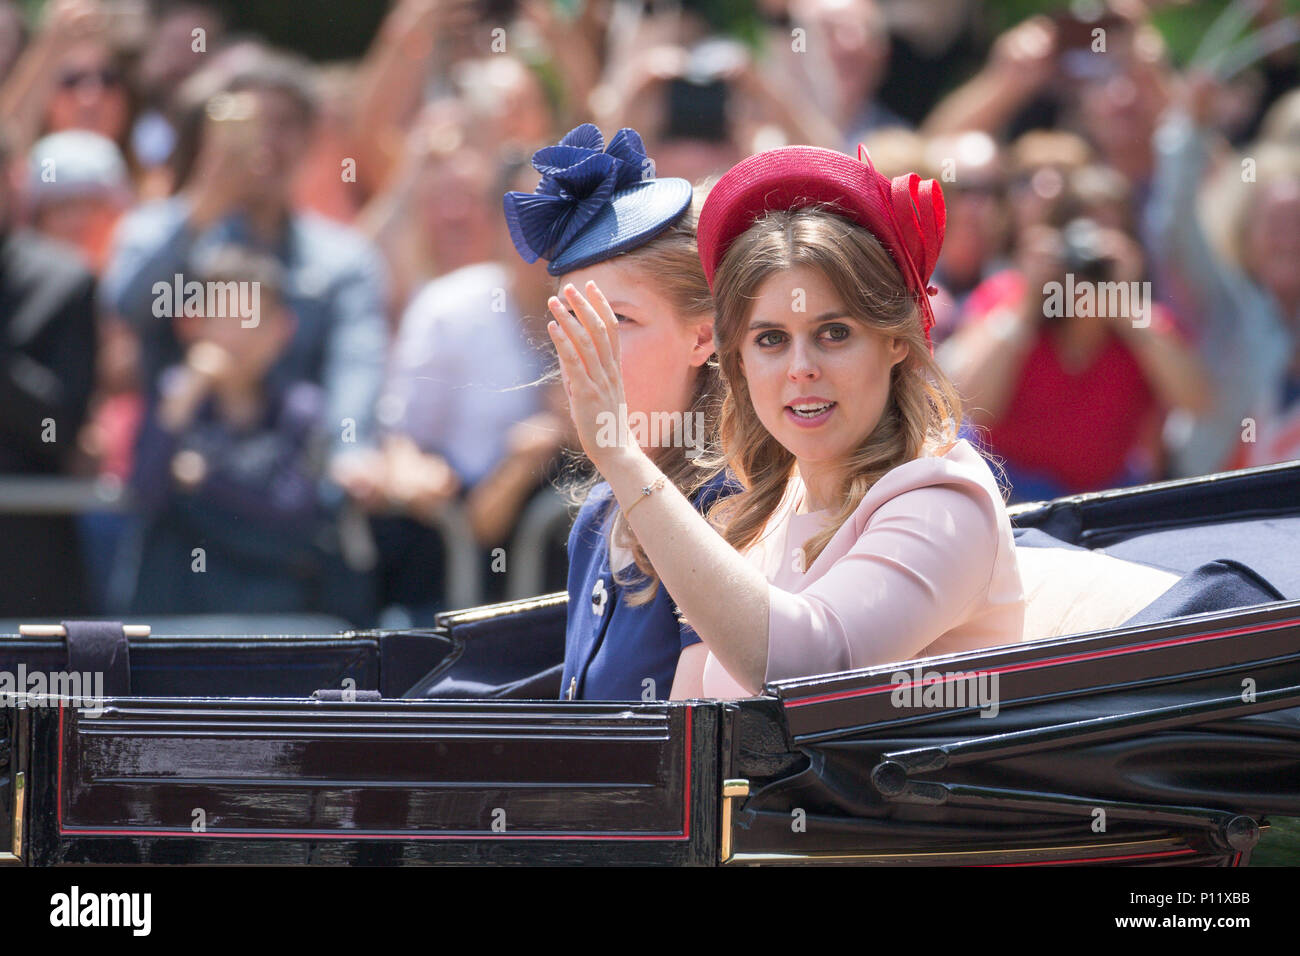 Picture dated June 9th shows  Princess Beatrice of York (red hat) and Lady Louise Windsor at the Trooping the Colour in London today.  The Duke and Duchess of Sussex have joined the Queen for the Trooping the Colour parade to mark her 92nd birthday.  Print Harry and Meghan Markle, who married last month, arrived as part of the carriage procession.  Large crowds of spectators gathered to watch Saturday's ceremony, which saw around 1,000 soldiers march to Horse Guards Parade in Whitehall. Stock Photo